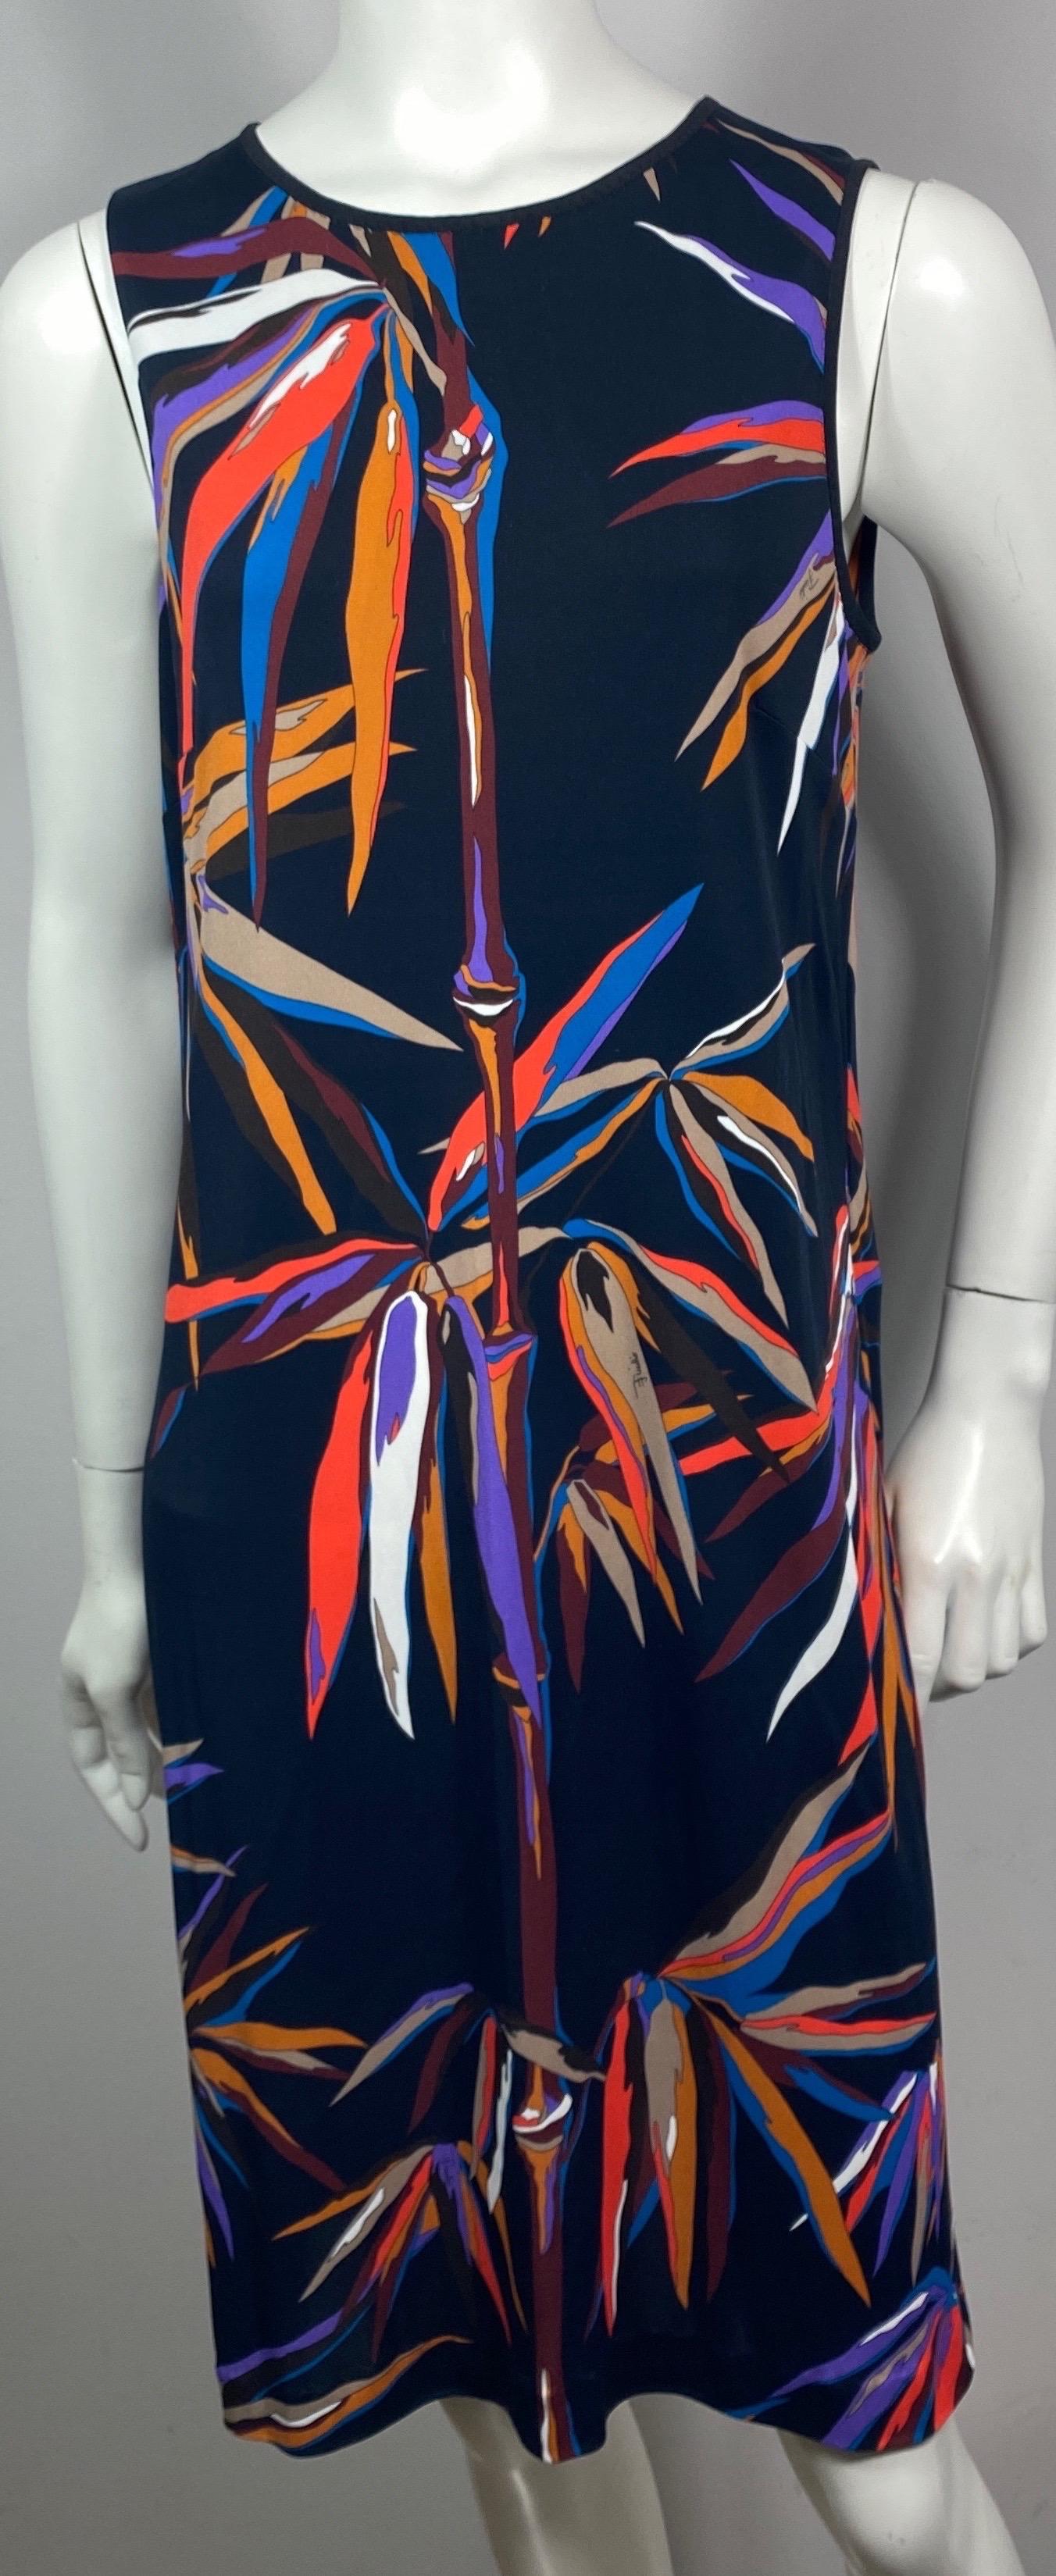 Emilio Pucci Black/Multi Abstract Silk Blend Sleeveless Shift Dress-US Size 10  This beautiful Pucci abstract print sleeveless shift is made of a silk blend, round neckline with a .25” black silk trim around the armhole and neckline. The back of the